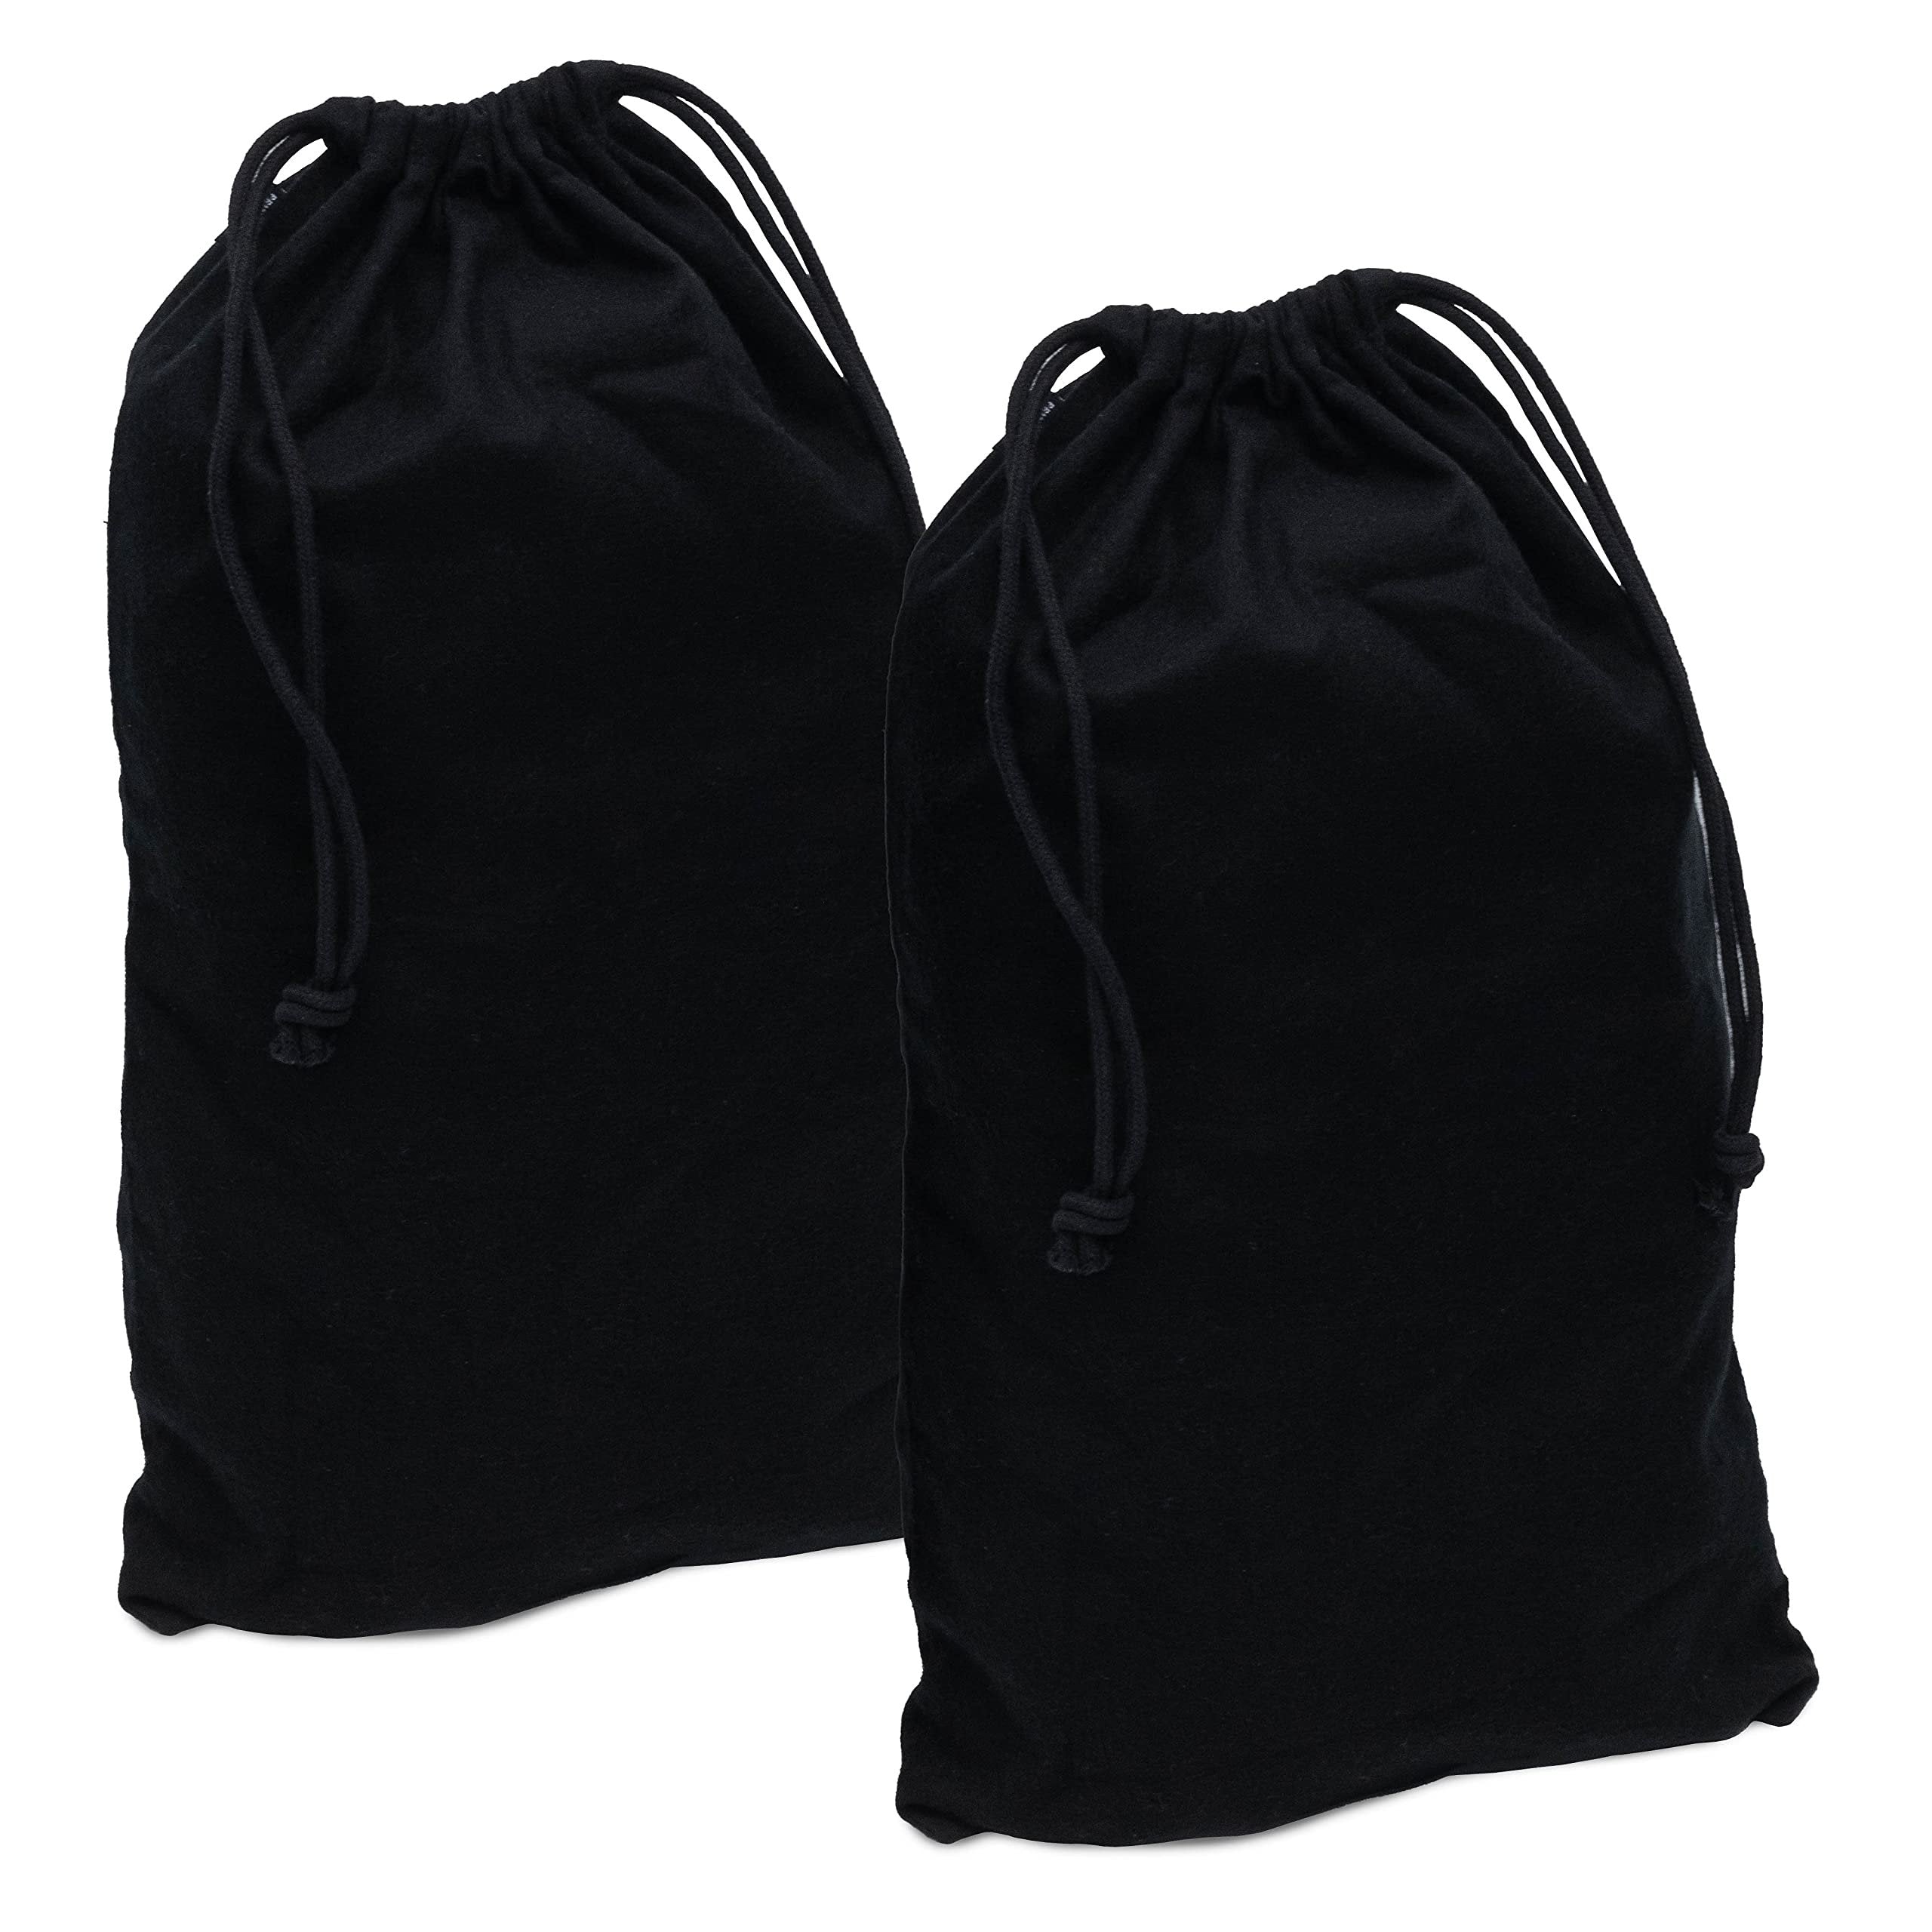 Black Cotton Shoe Dust Bags- 2 Pack 12.5x20.5 Inch with Drawstring Closure - Washable, Breathable - Ideal for Travel, Storage, Handbags